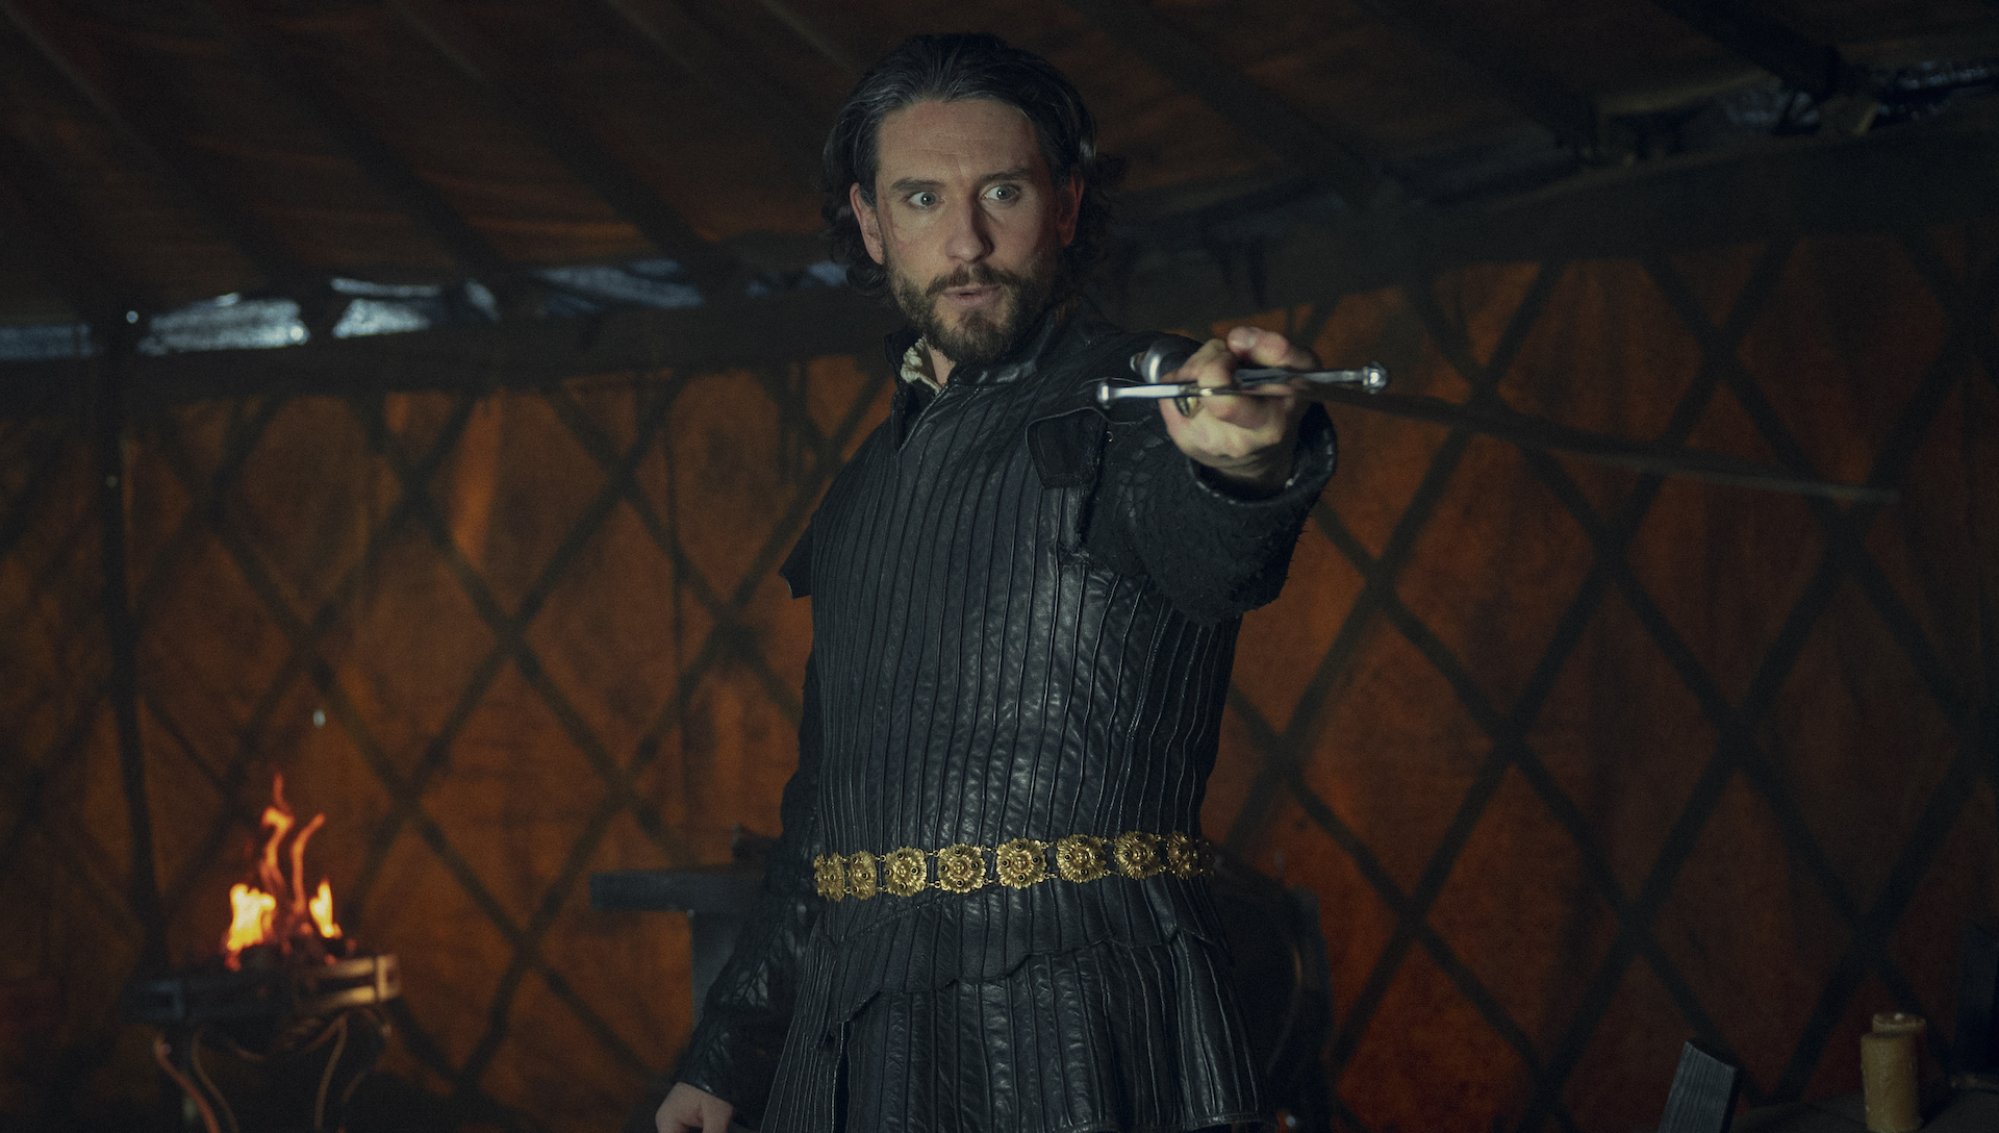 Bart Edwards, in black armor and holding a sword in front of him, in "The Witcher.